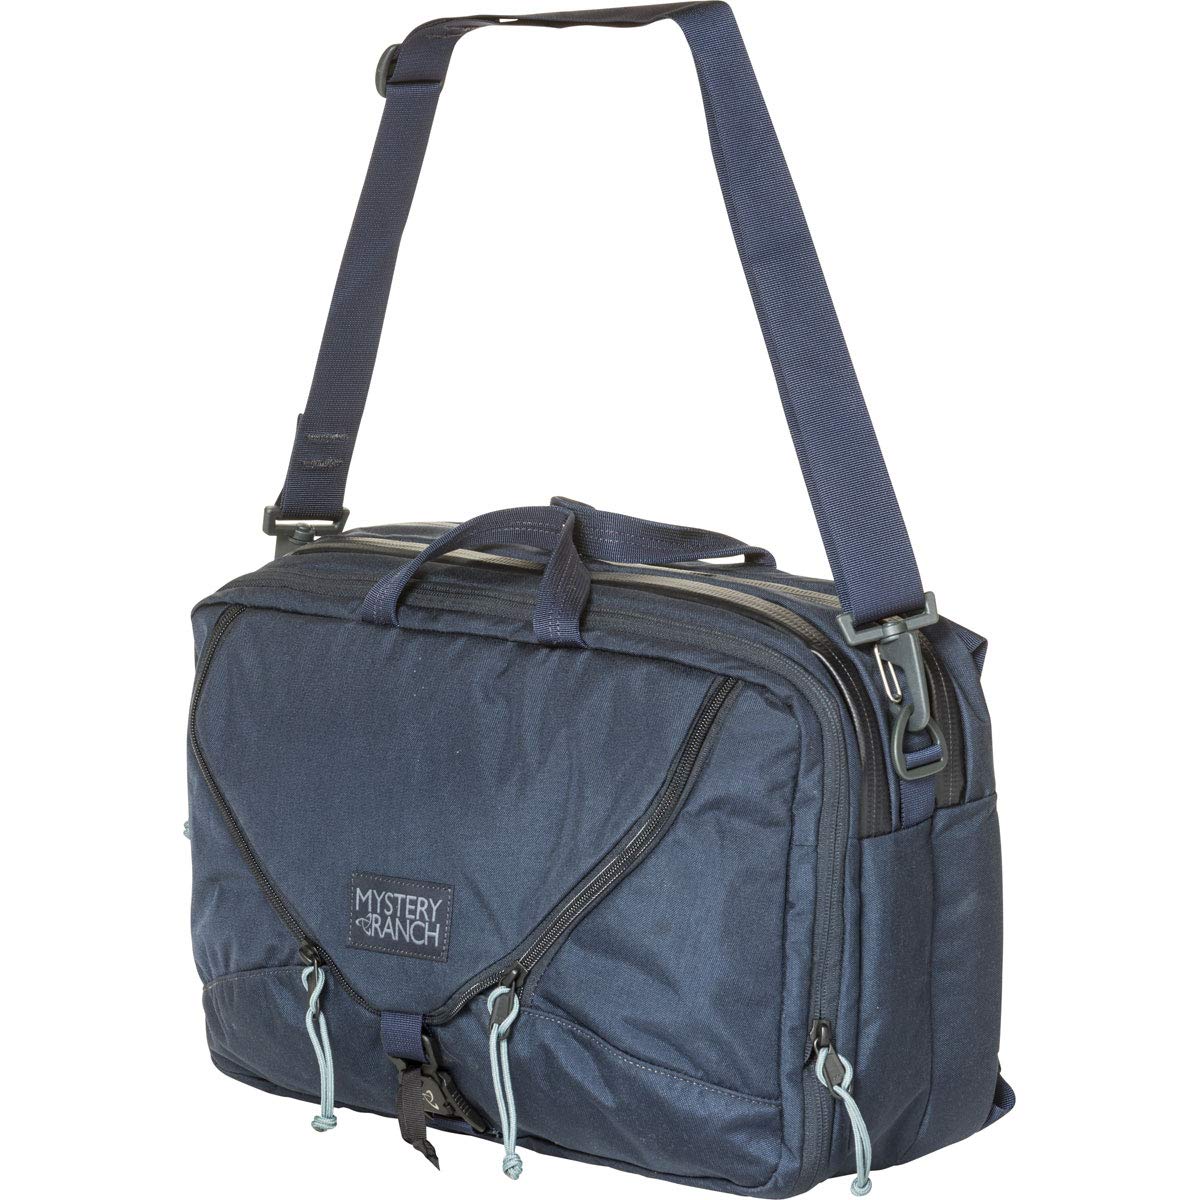 Mystery Ranch 3 Way Briefcase - Carry as Tote, Backpack and Shoulder Bag